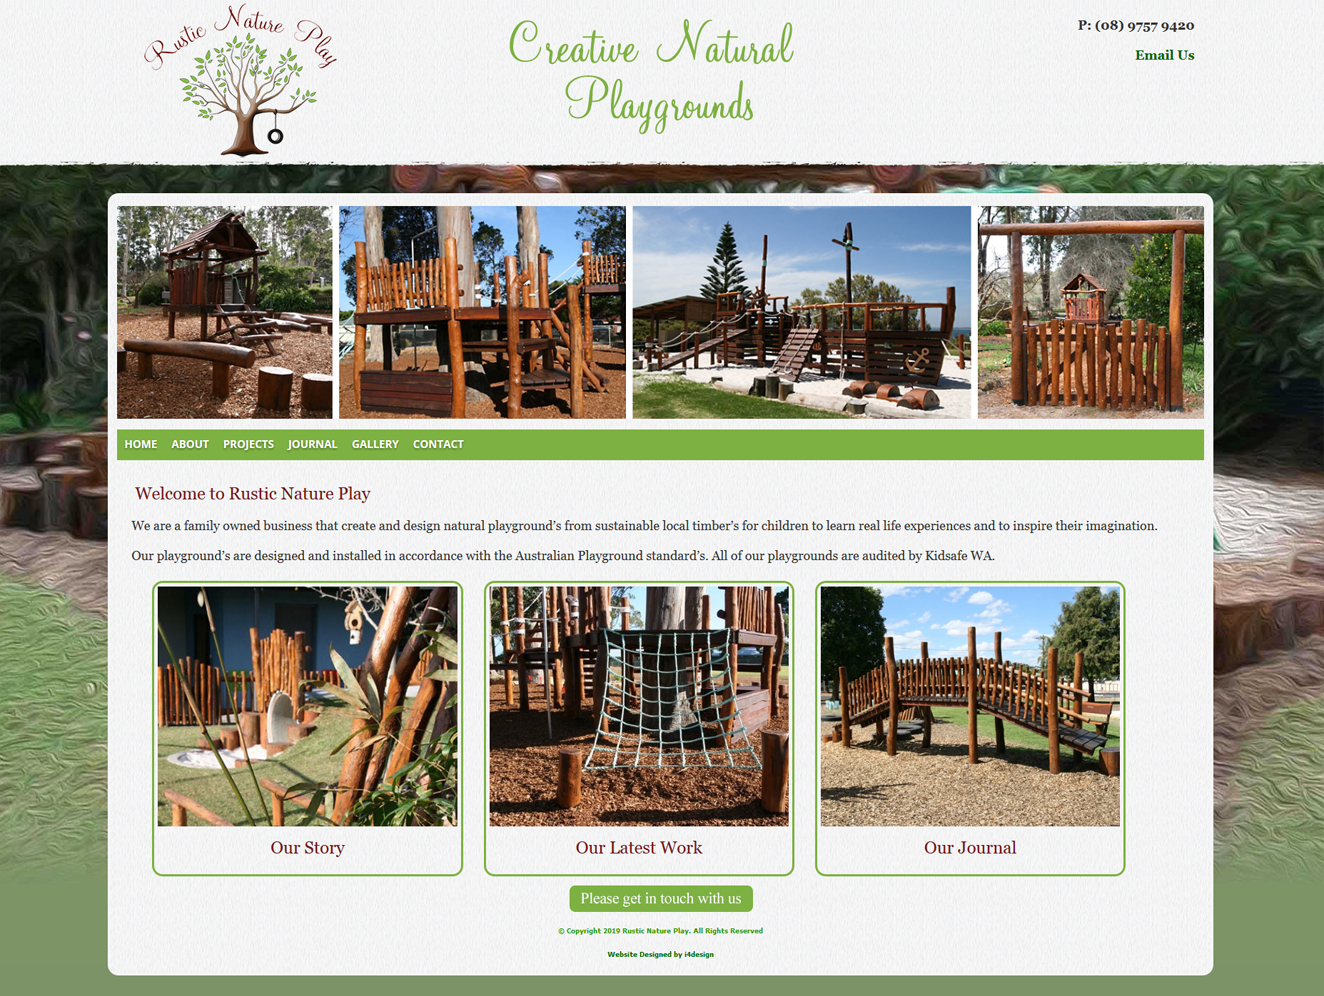 Rustic Nature Play